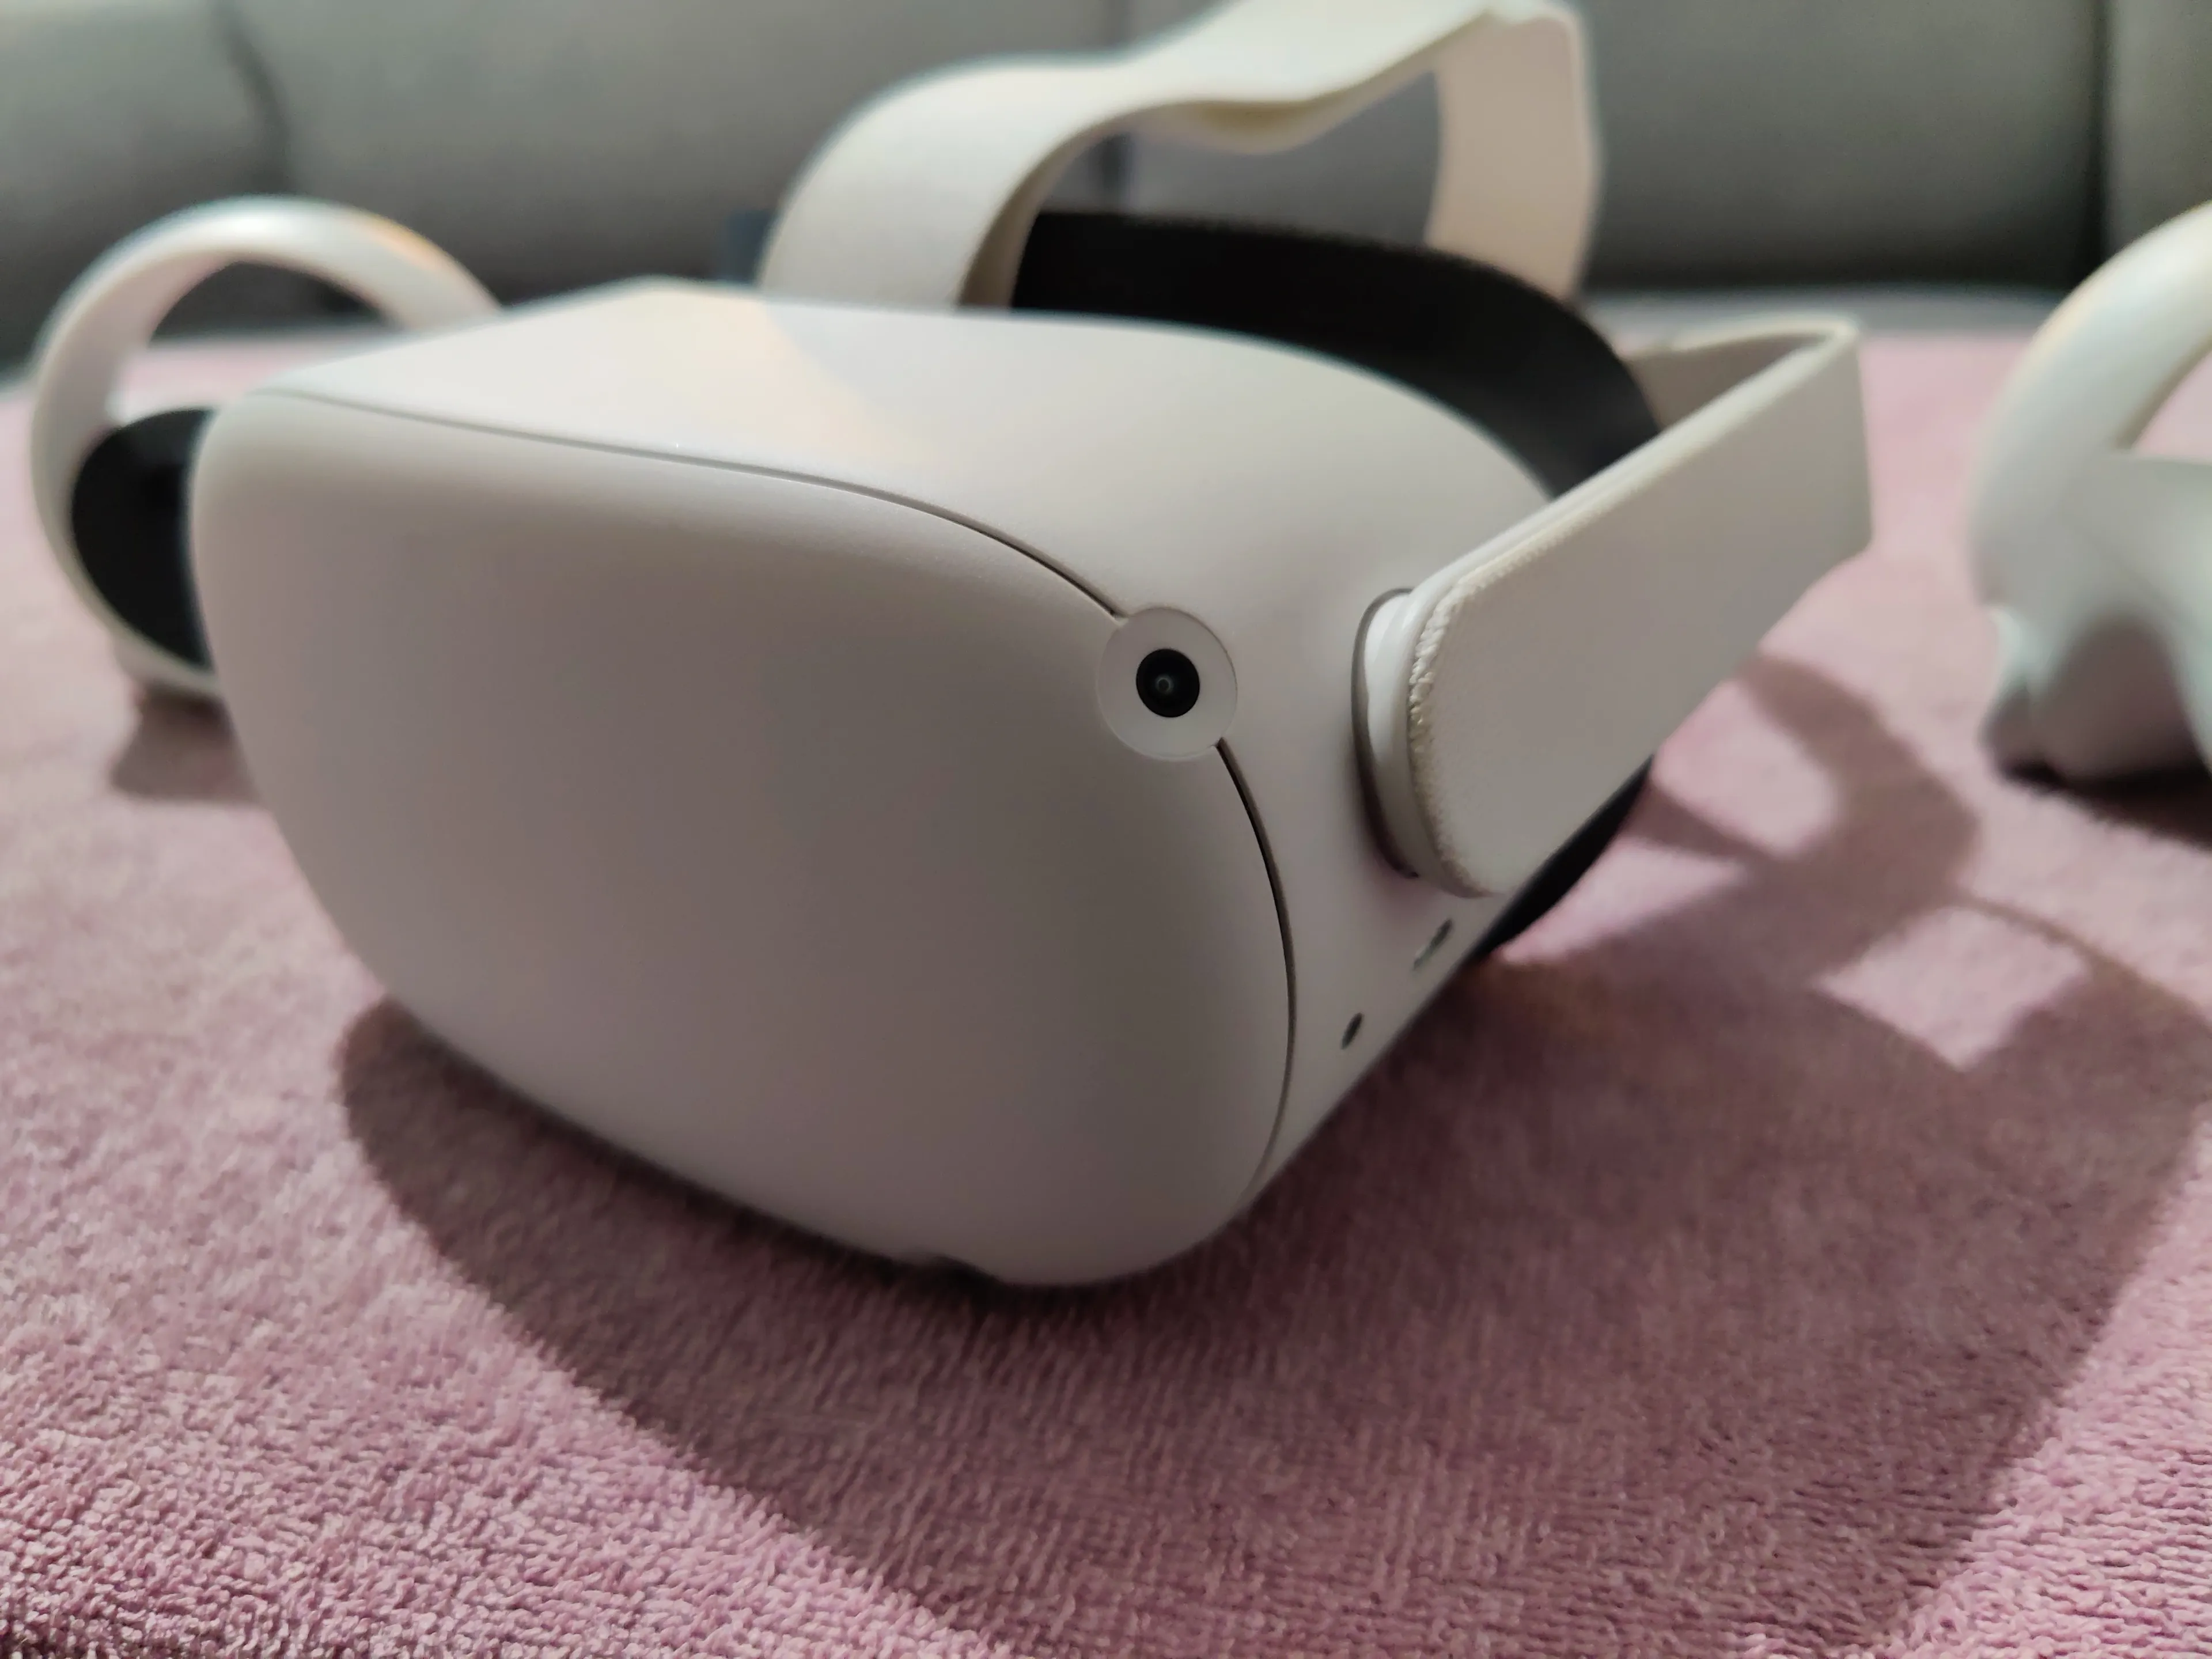 oculus quest 2 review 3f1604088118